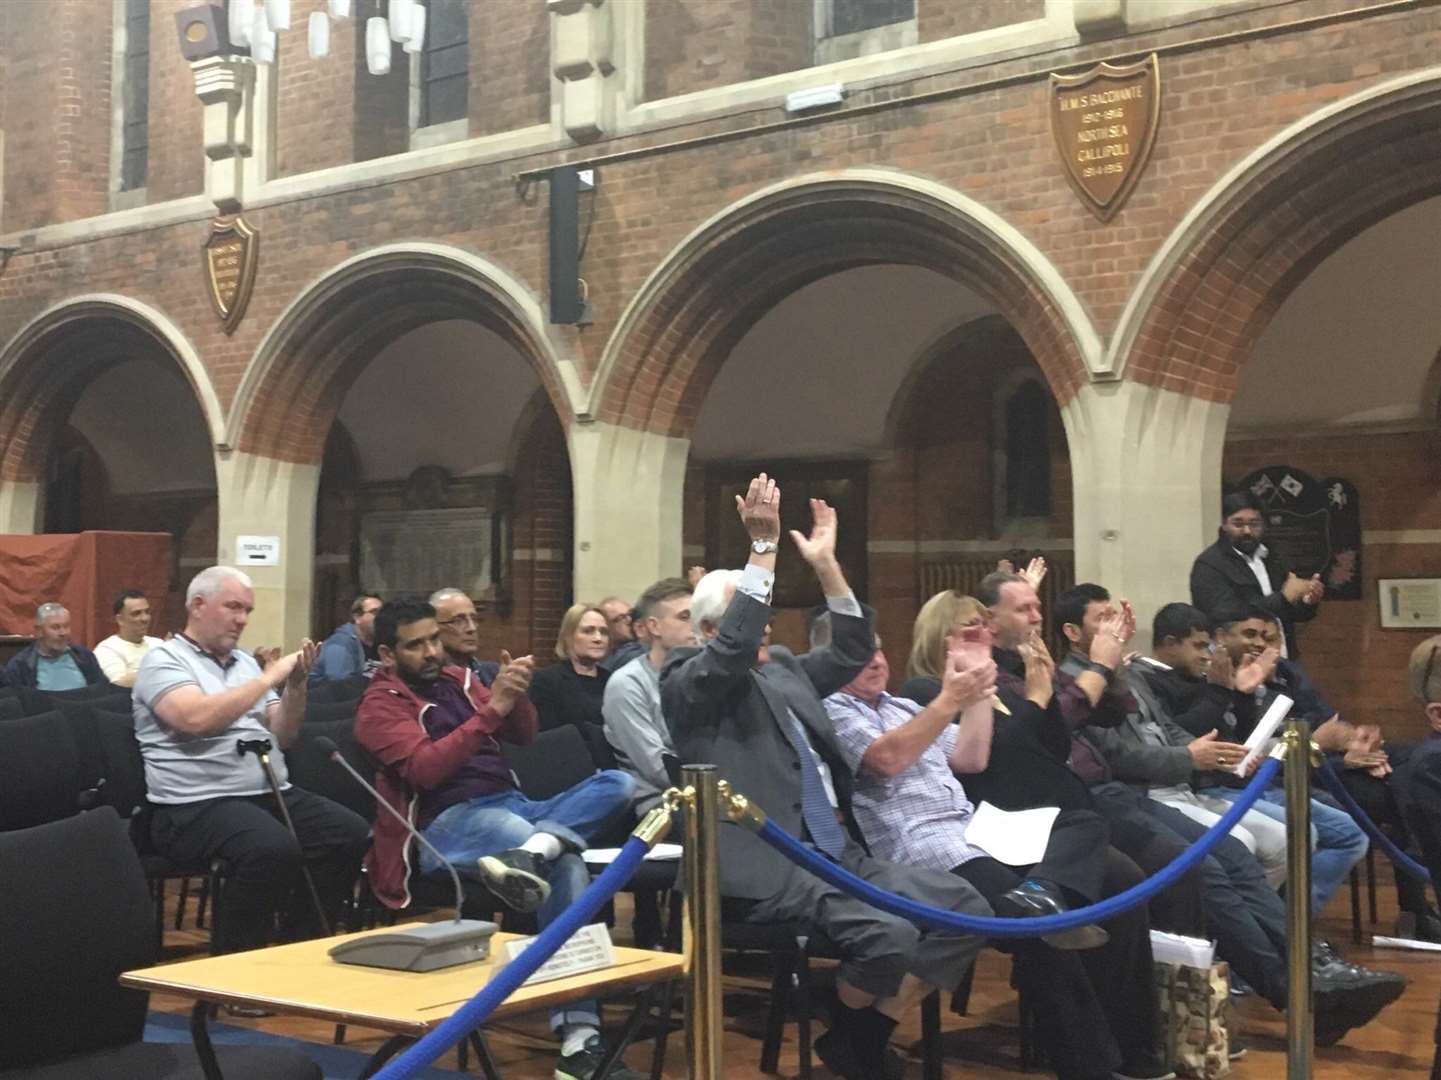 Medway taxi drivers at Medway Council, April 25 2019 (9395367)